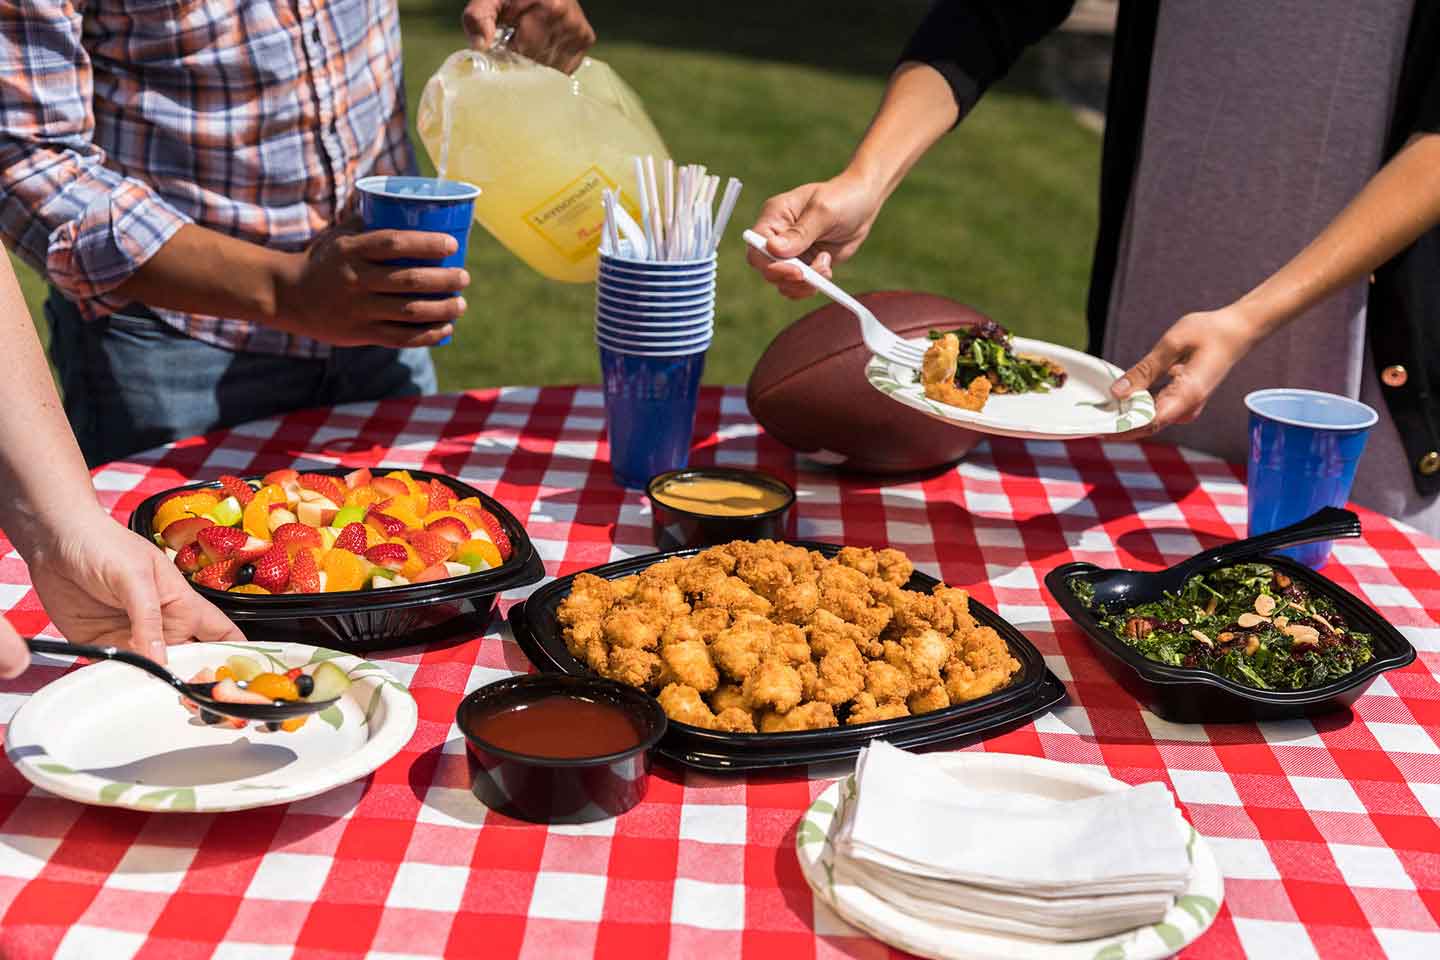 Feeding a crowd? Chick-fil-A has you covered.